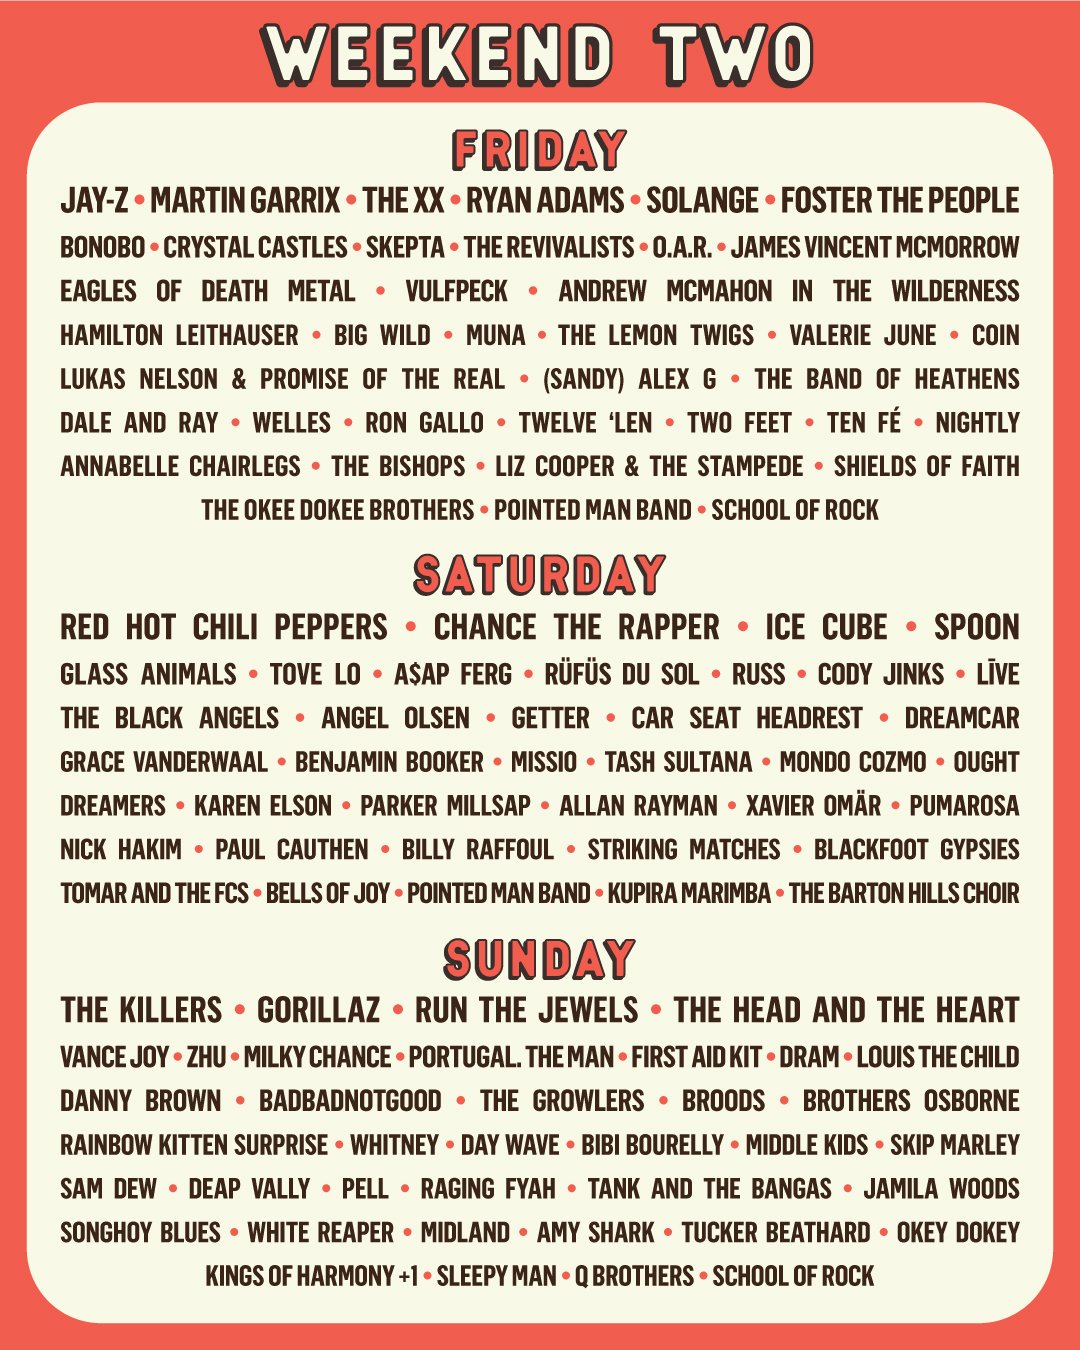 ACL Festival 2017 Weekend Two lineup. Photo by: ACL Fest / Twitter